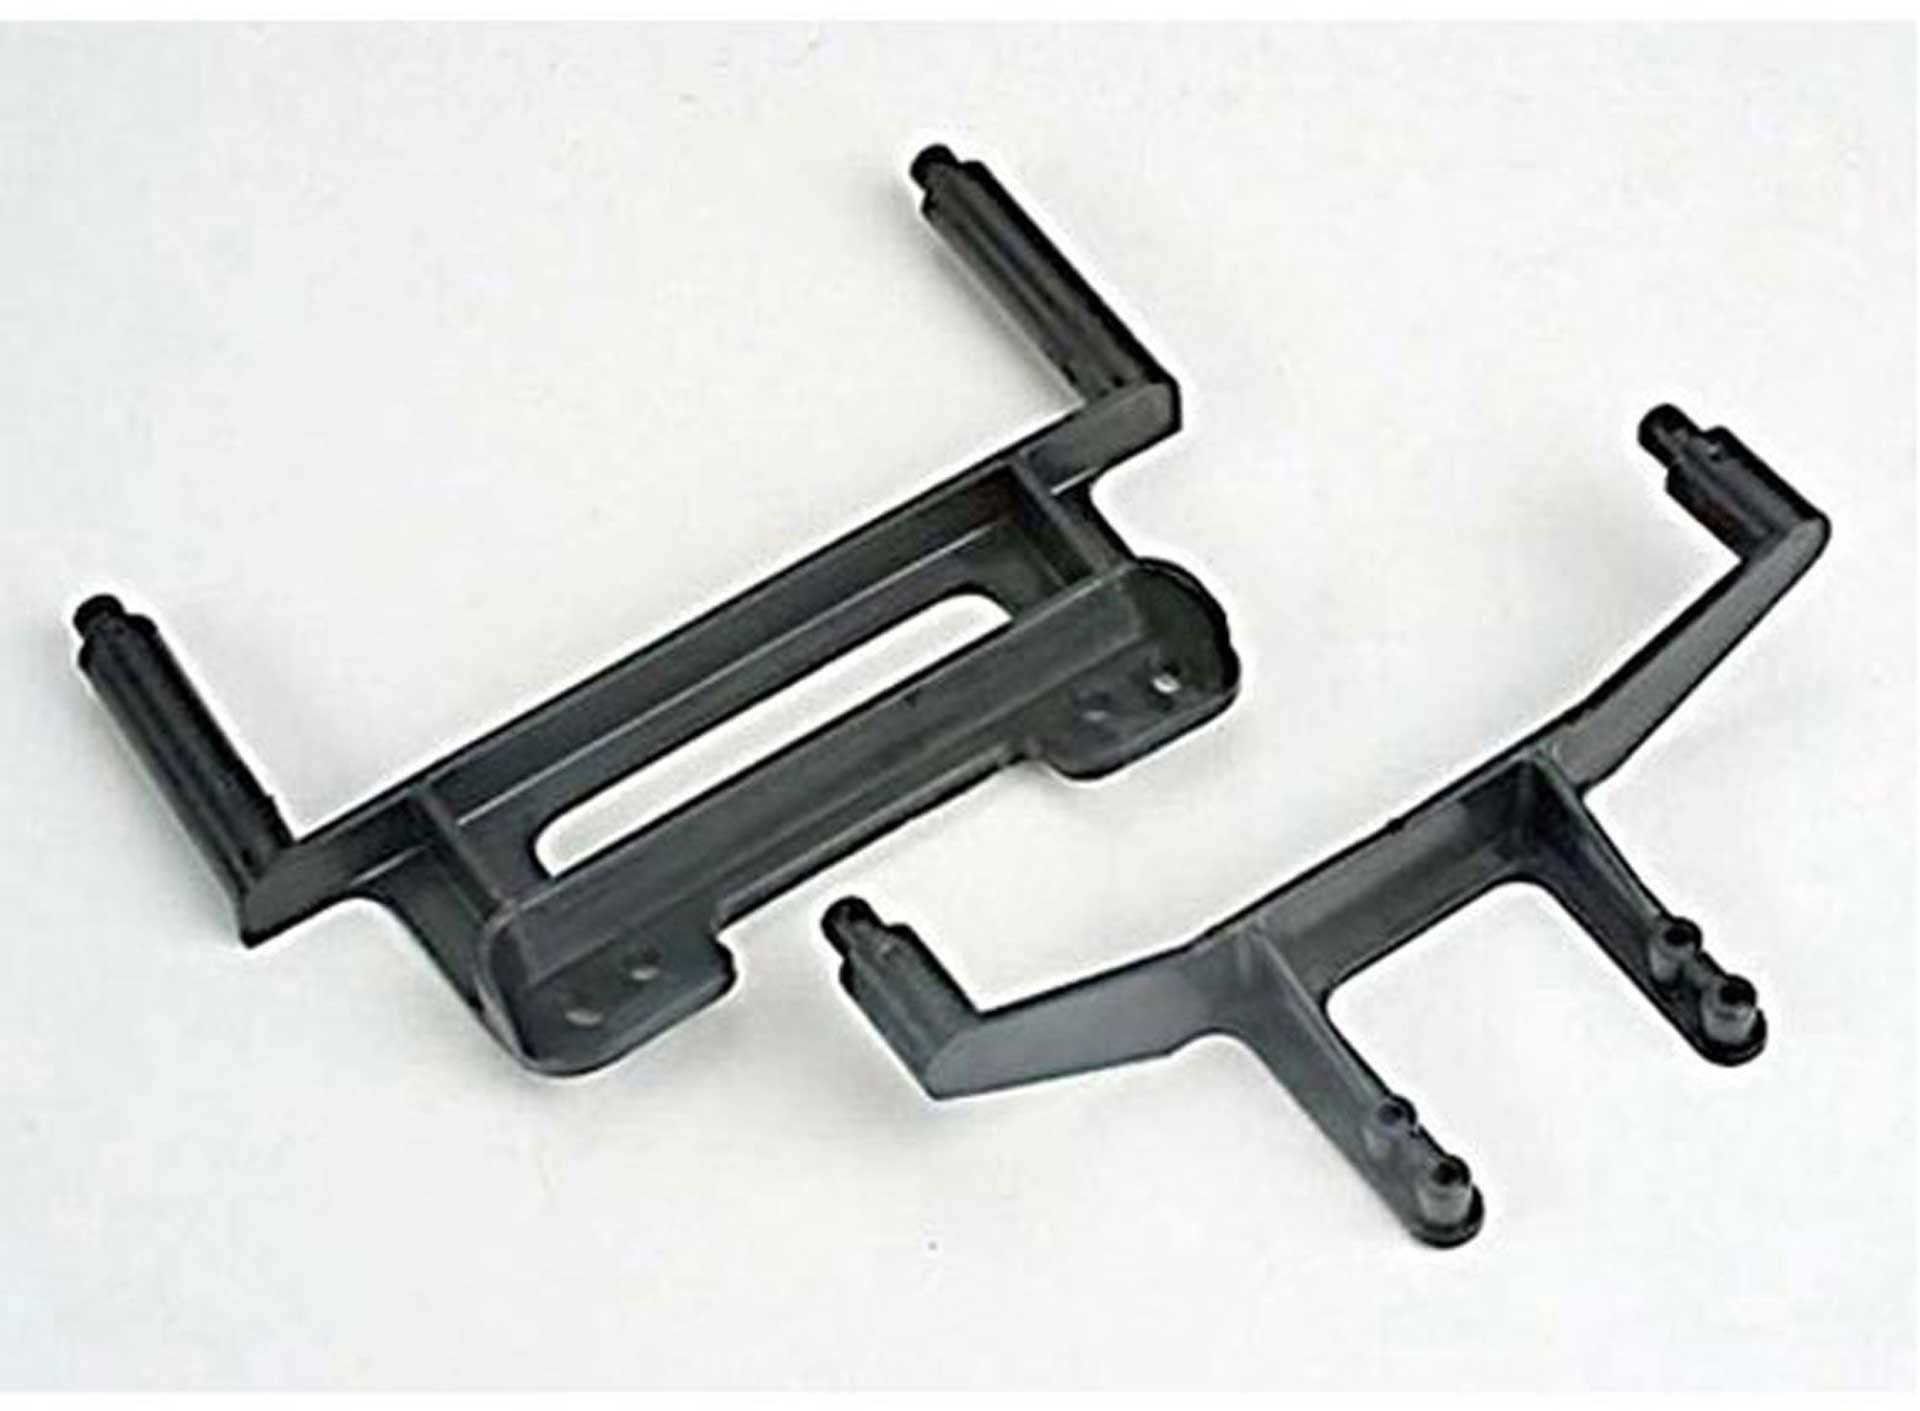 Traxxas 3614 Front and Rear Body Mounts